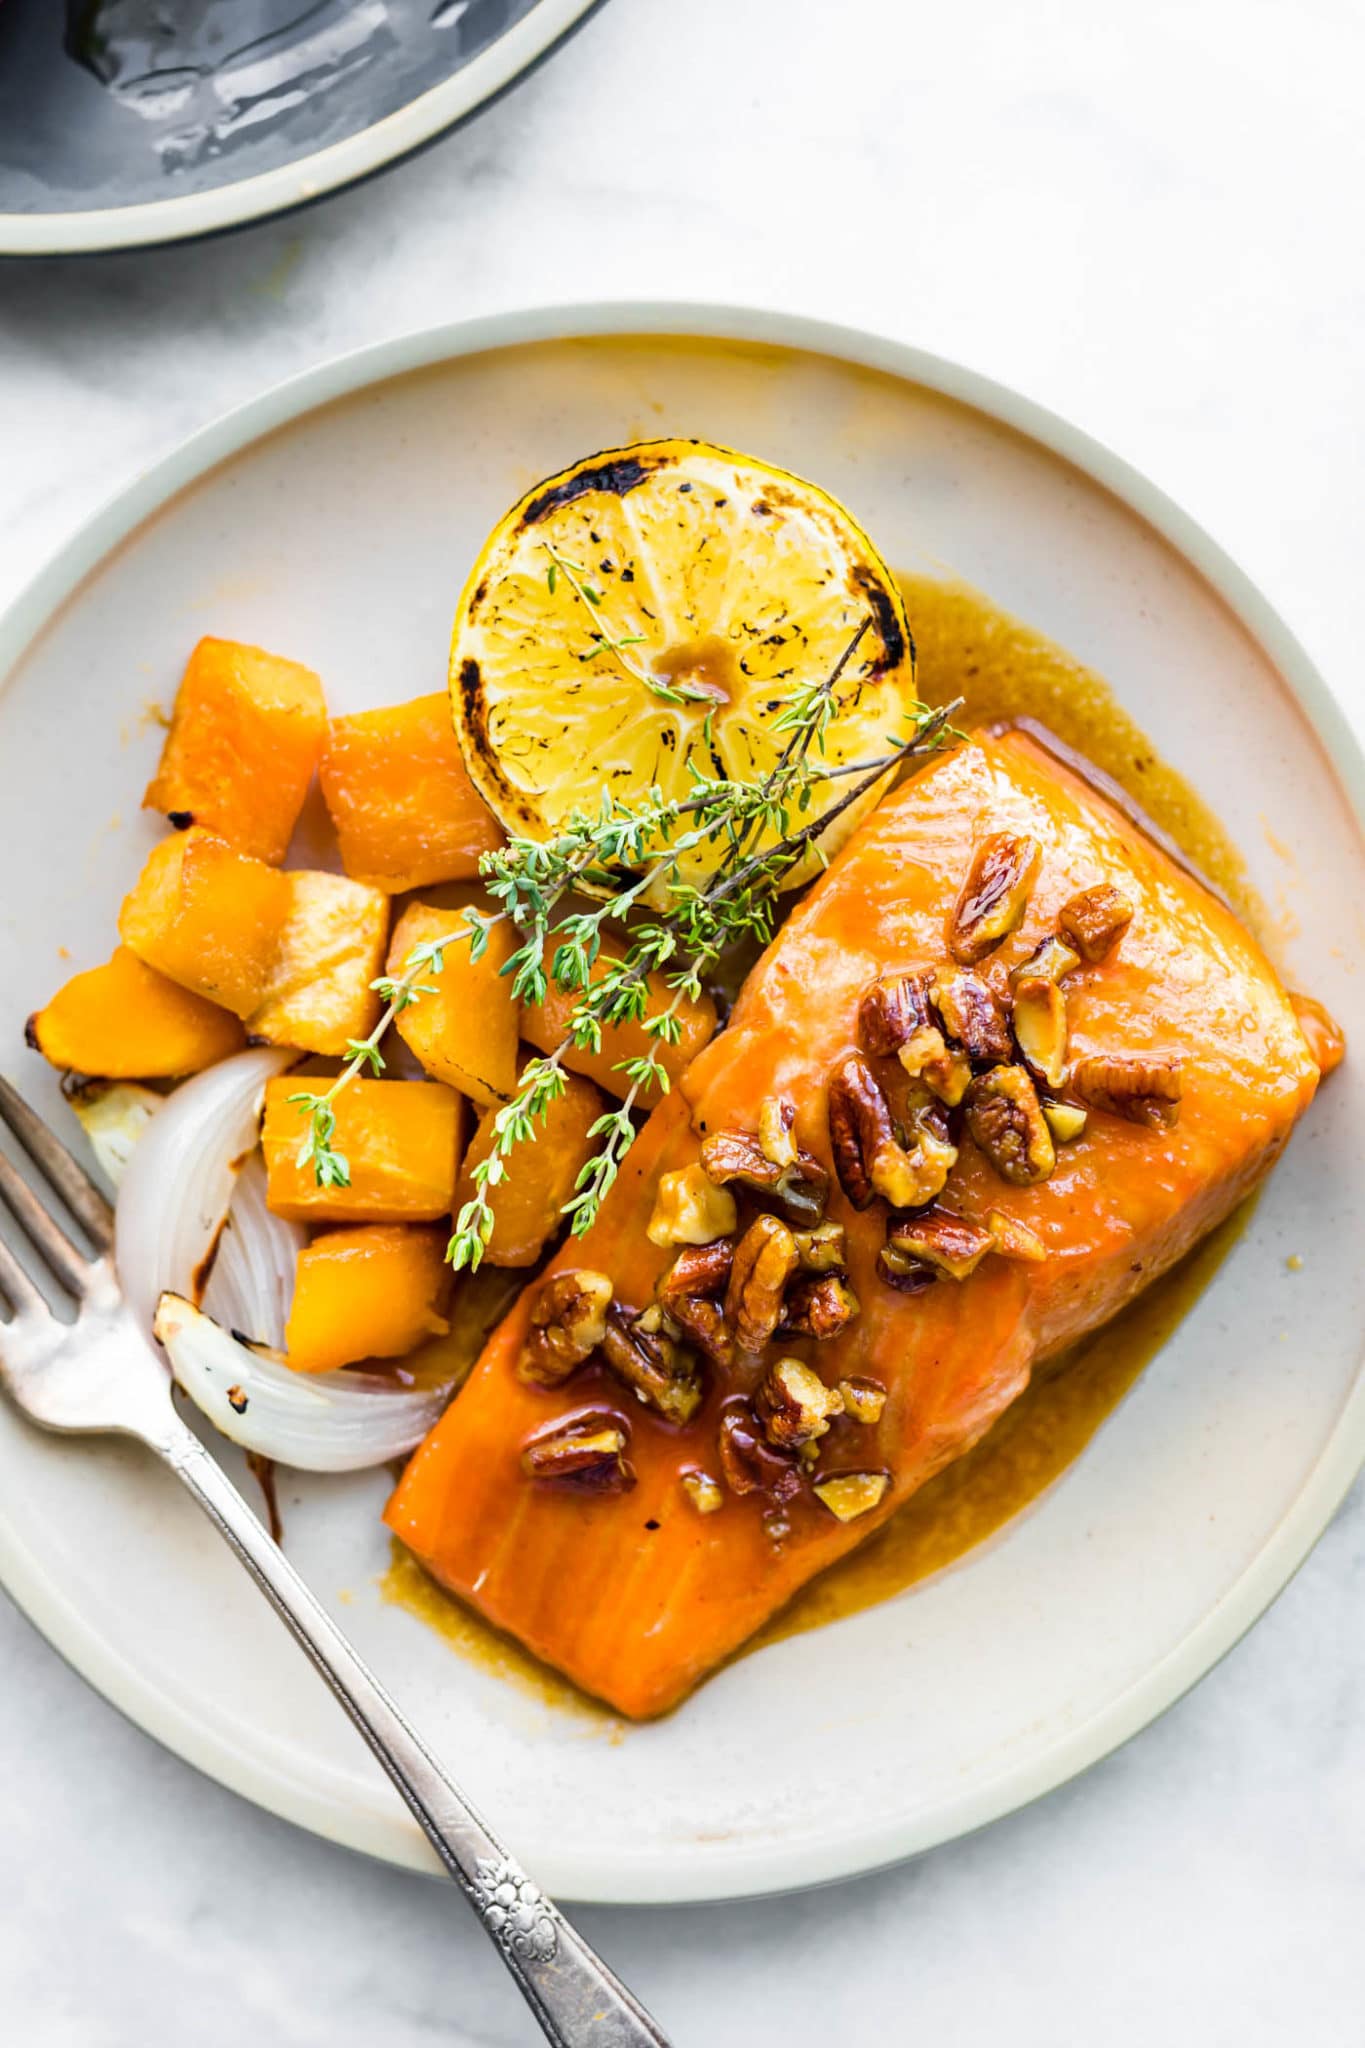 close up image of maple bourbon glazed salmon topped with candied pecans on a cream speckled plate with side of roasted butternut squash and slightly charred edge lemon half.